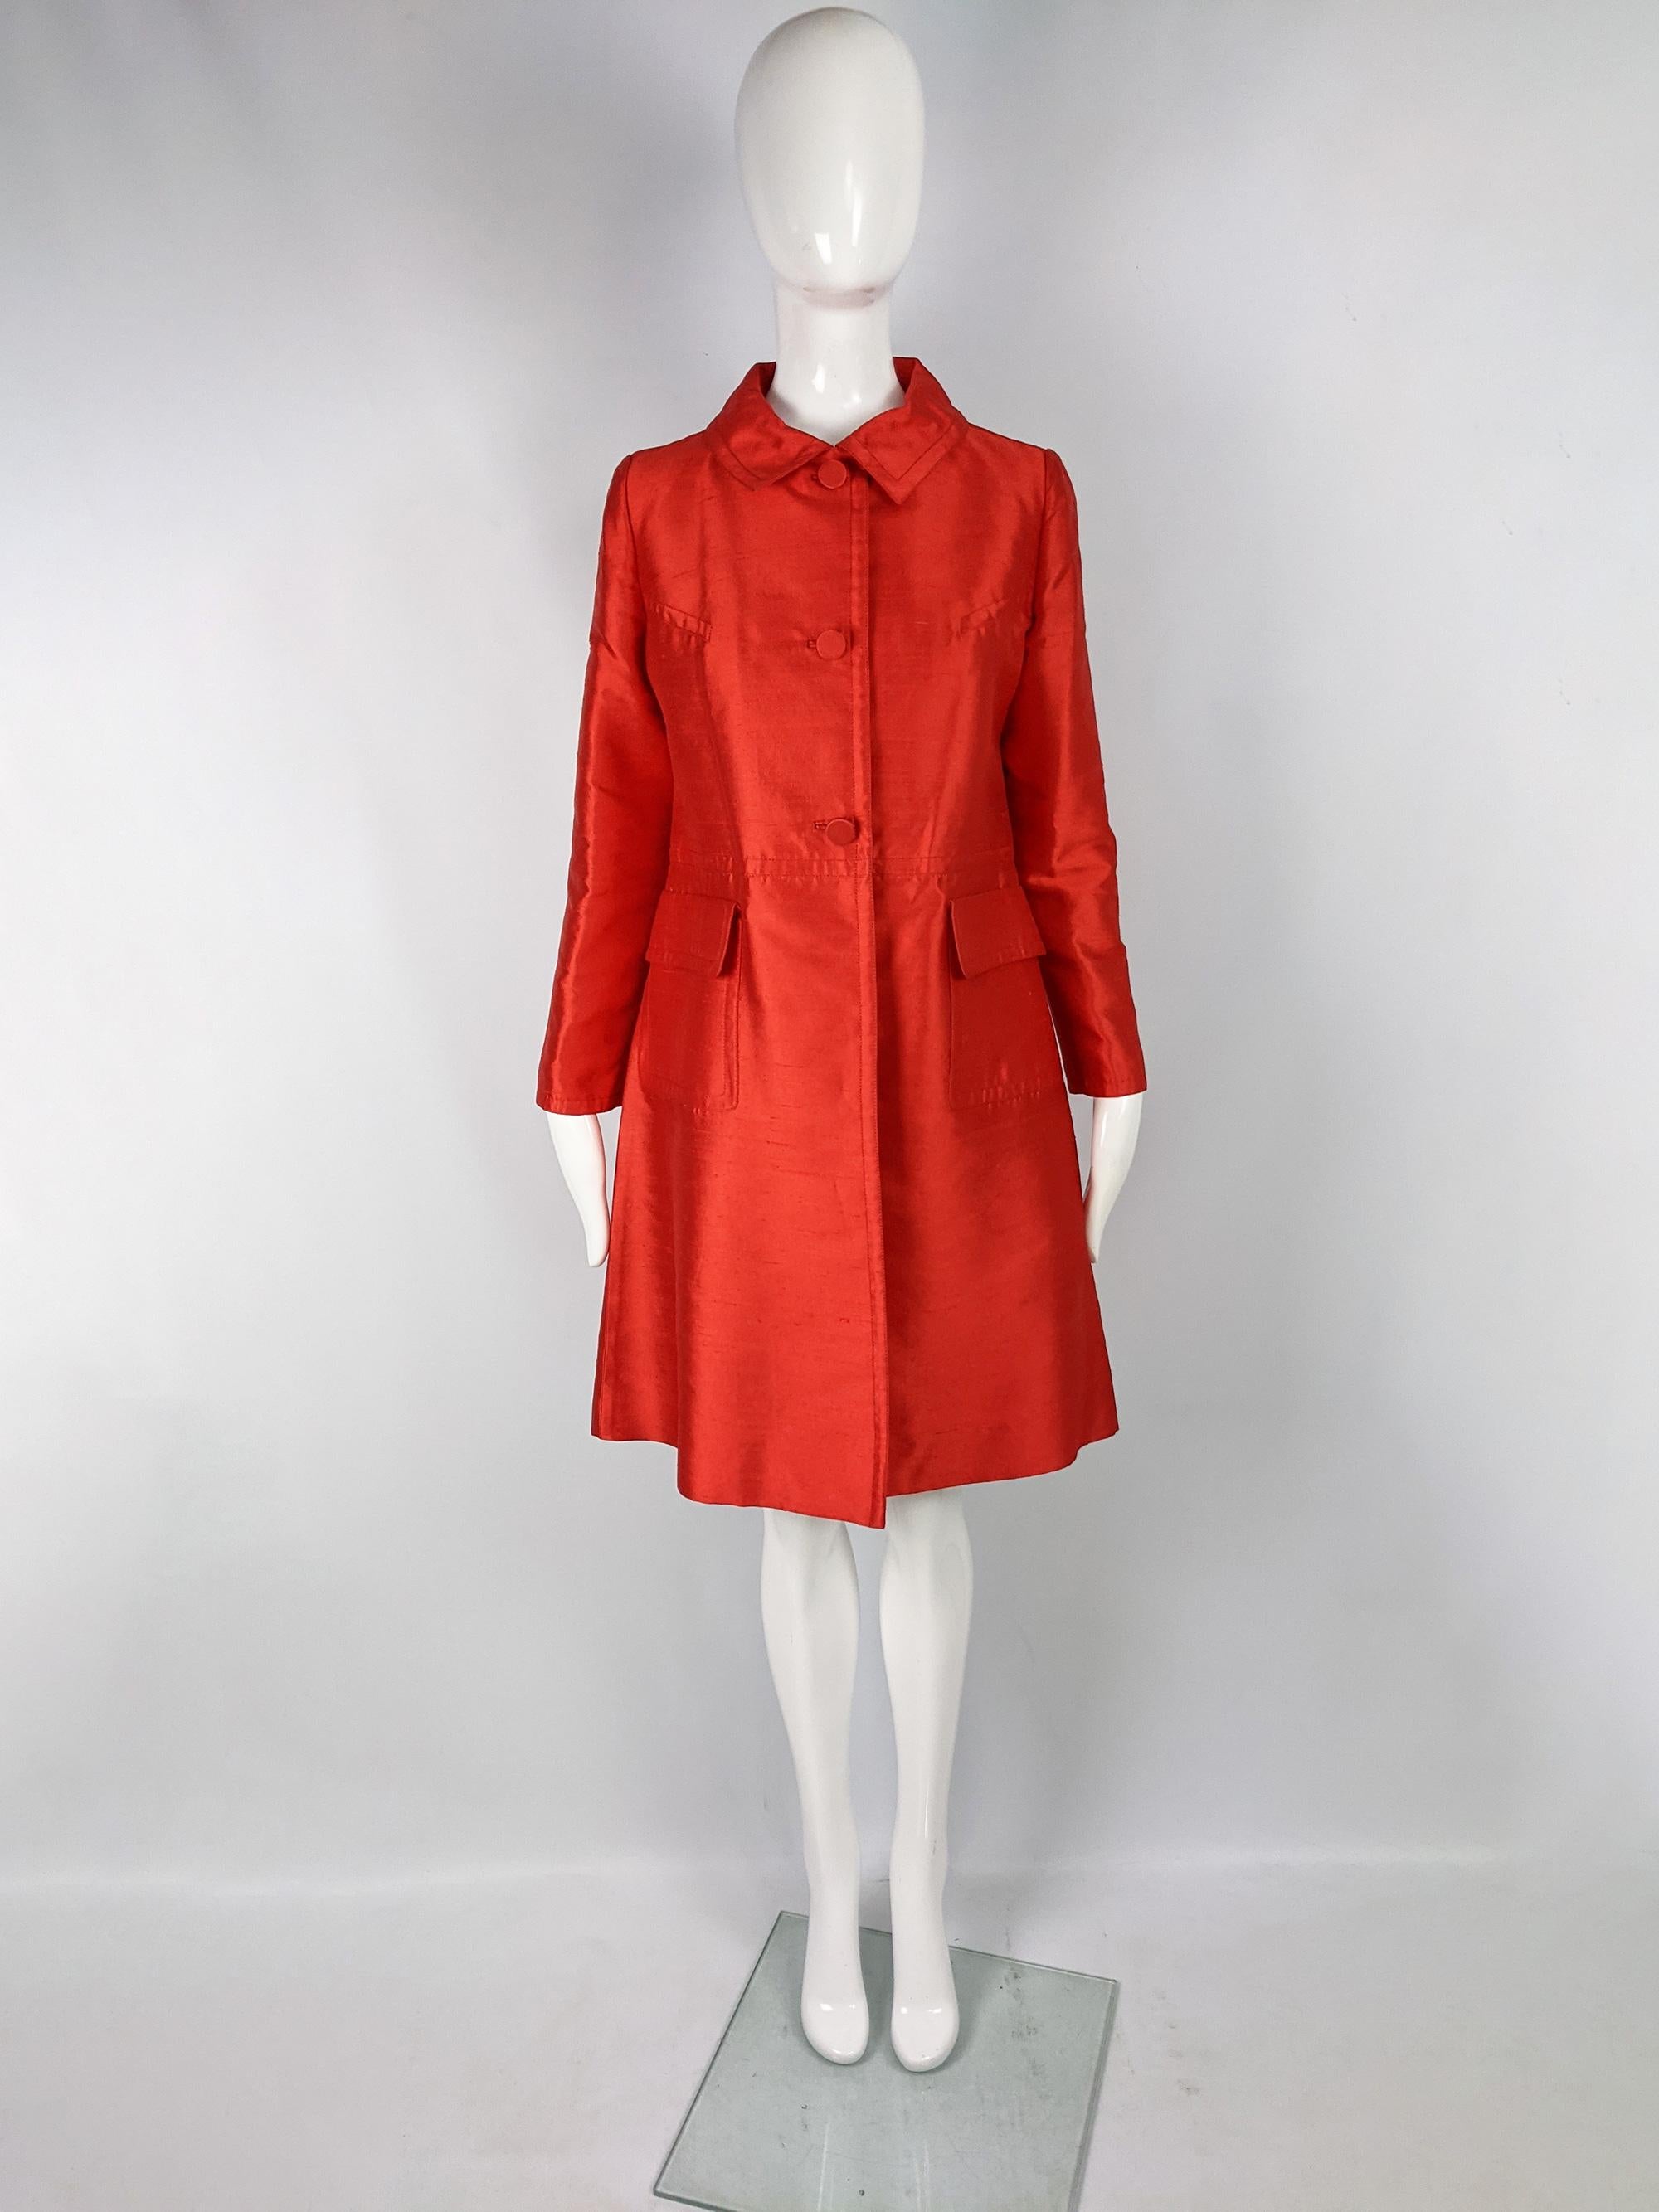 An incredible vintage womens opera coat from the 60s by luxury French fashion designer, Louis Féraud. In a red wool and silk blend fabric with an A-line silhouette. Perfect for a party or evening event or dressing it down for a bold, glamorous touch